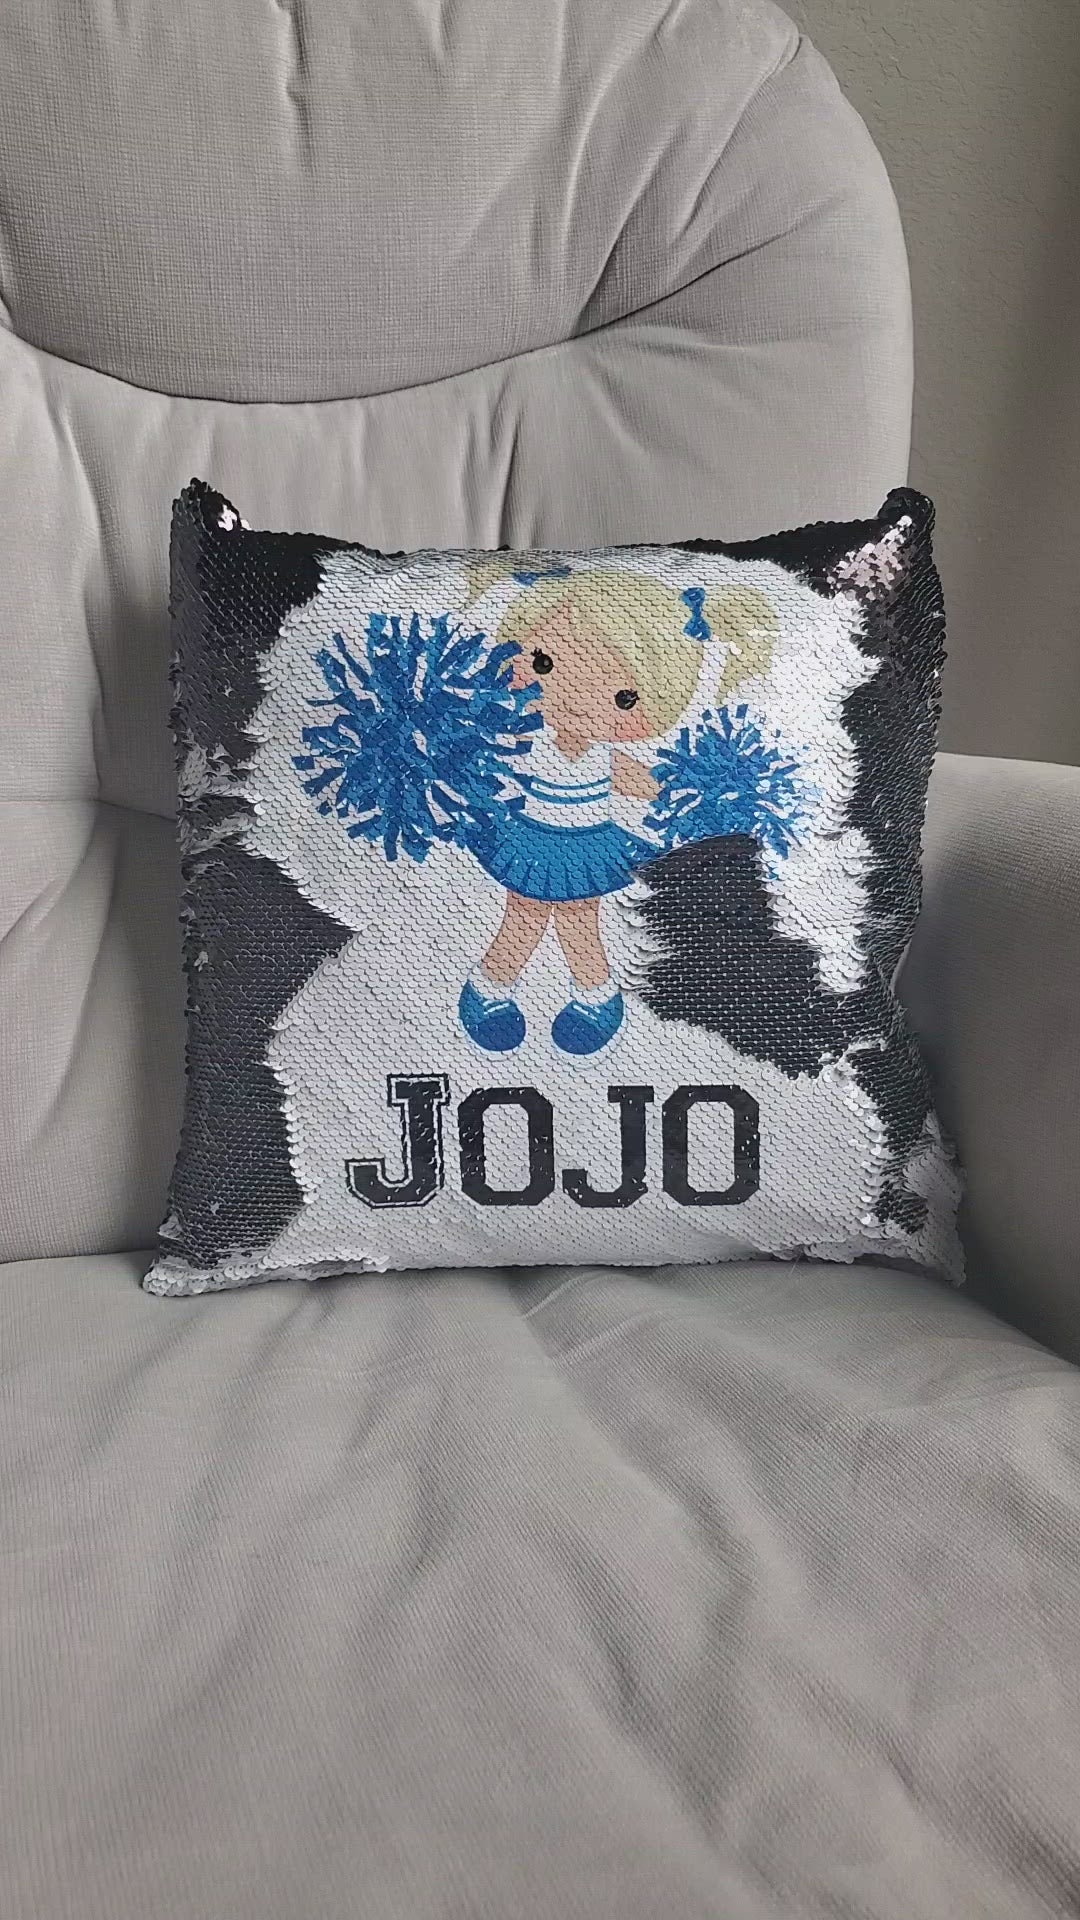 Personalized Cheer Gifts, Cheerleader Team Gift Ideas, Cheer Birthday Party Decor, Cute Gift for Toddler Girls 2, 3, 4, 5, 6, 7 year old, Birthday Gift for Girls, Cheerleader pillow case personalized Sequin Throw Pillowcase Custom Reversible Pillow Decorative Cushion Pillow Cover, Cheer lover gift | Gift for child with Sensory Needs and or Autism, Birthday Theme Party Supplies